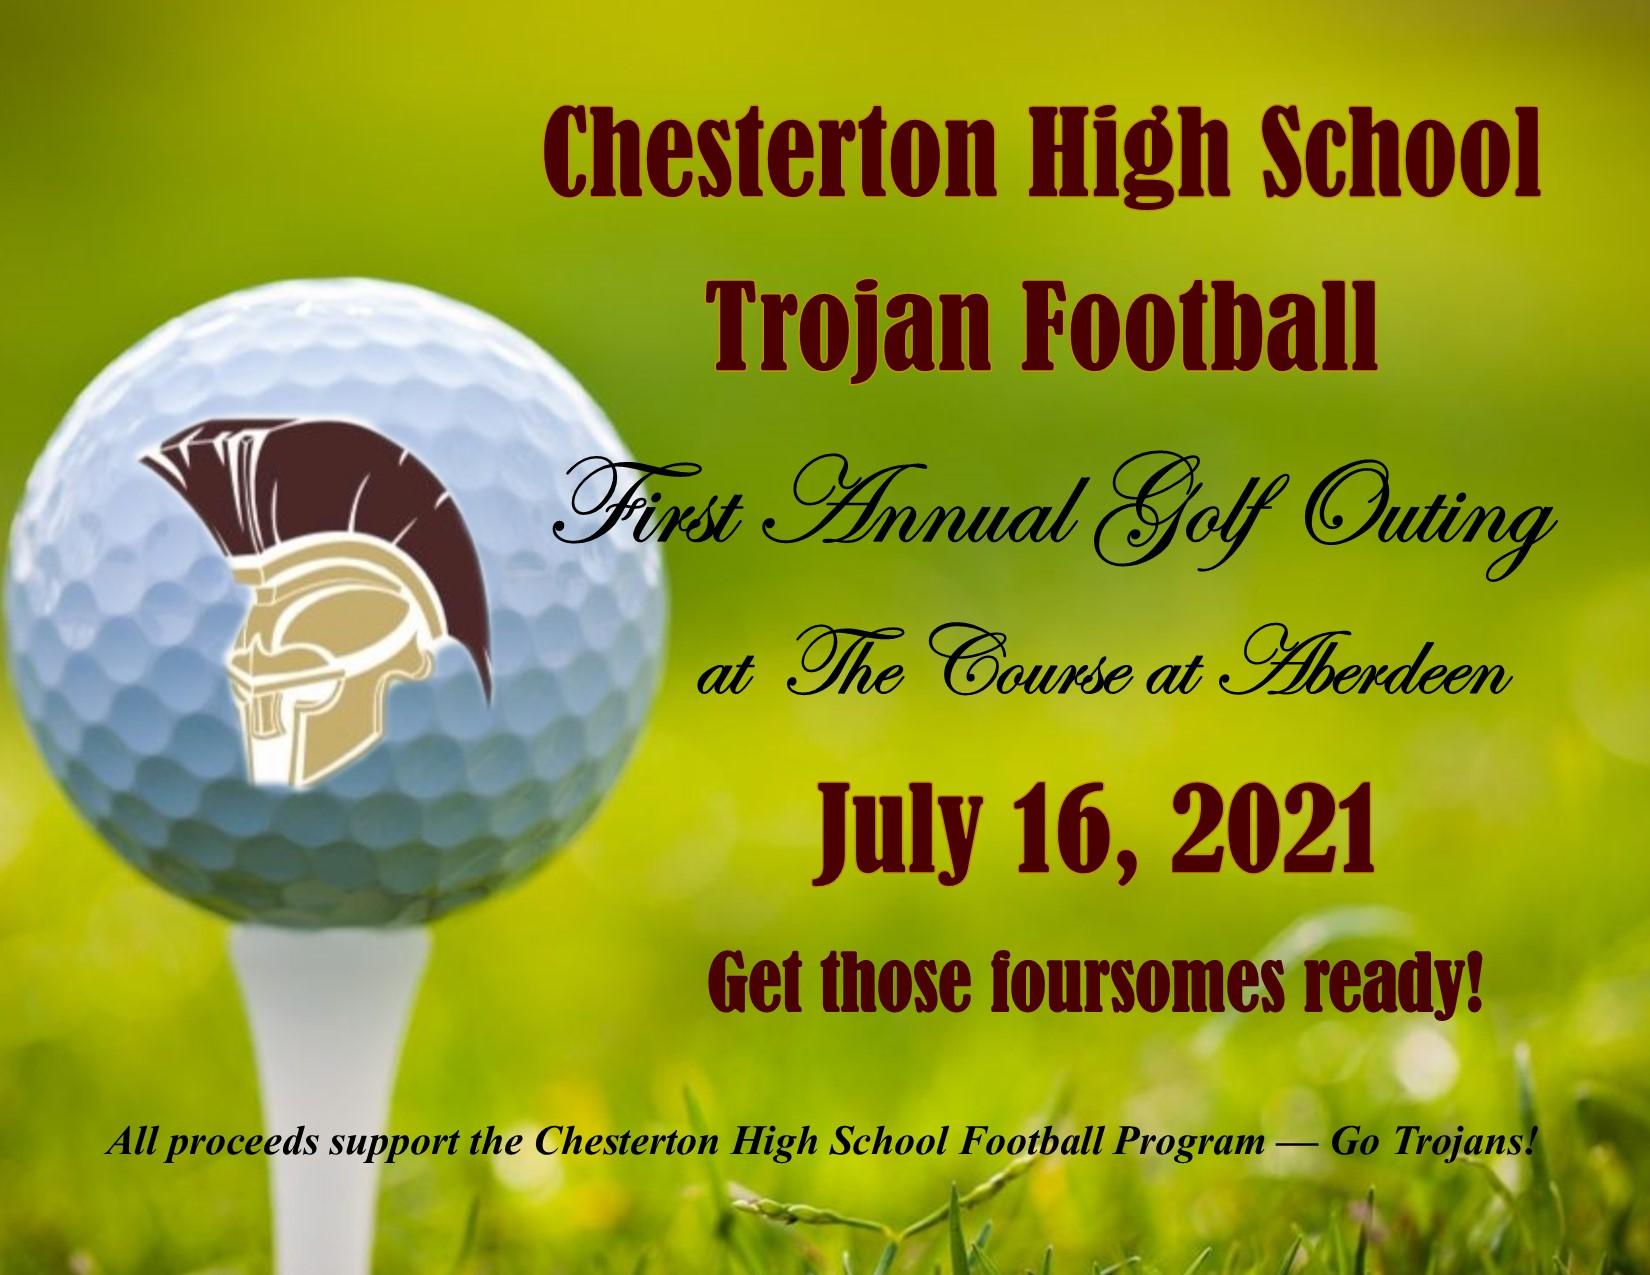 1st Annual CHS Football Golf Outing - July 16, 2021@the Course at Aberdeen